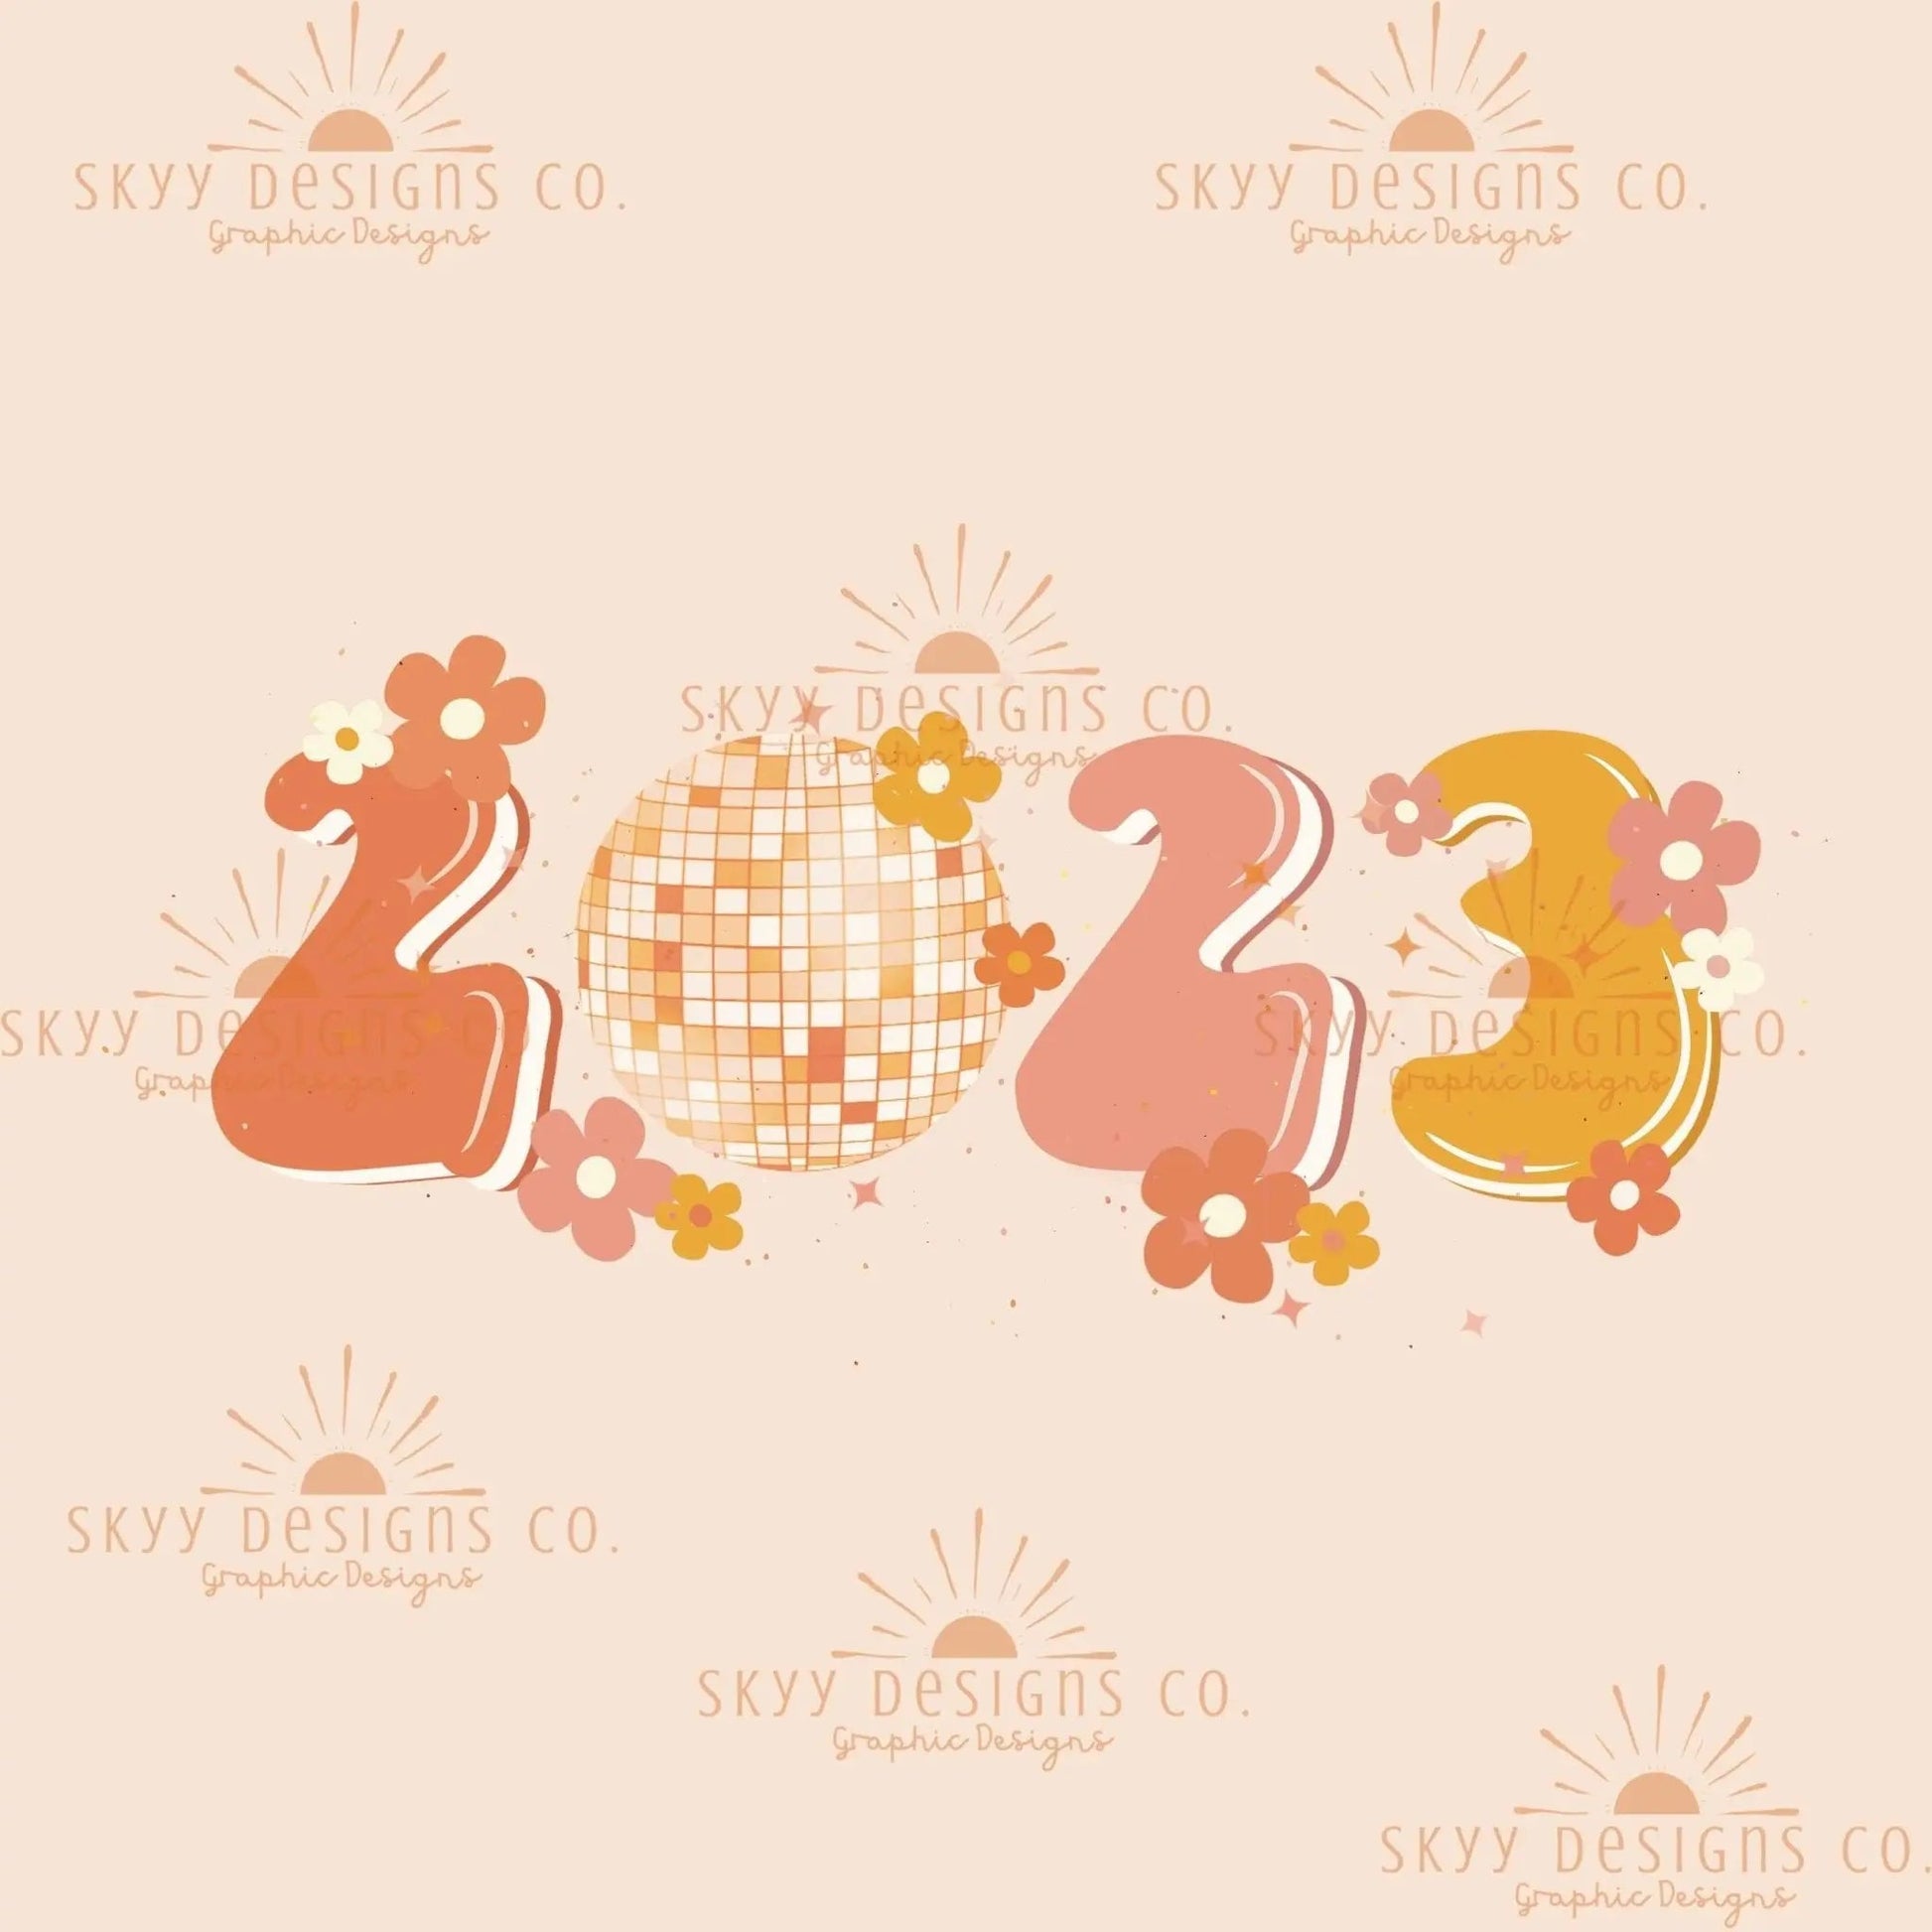 New year PNG, happy new year png sublimation, retro New Years png, groovy New Year’s Eve png, t shirt print png sublimation, 2023 png file - SkyyDesignsCo